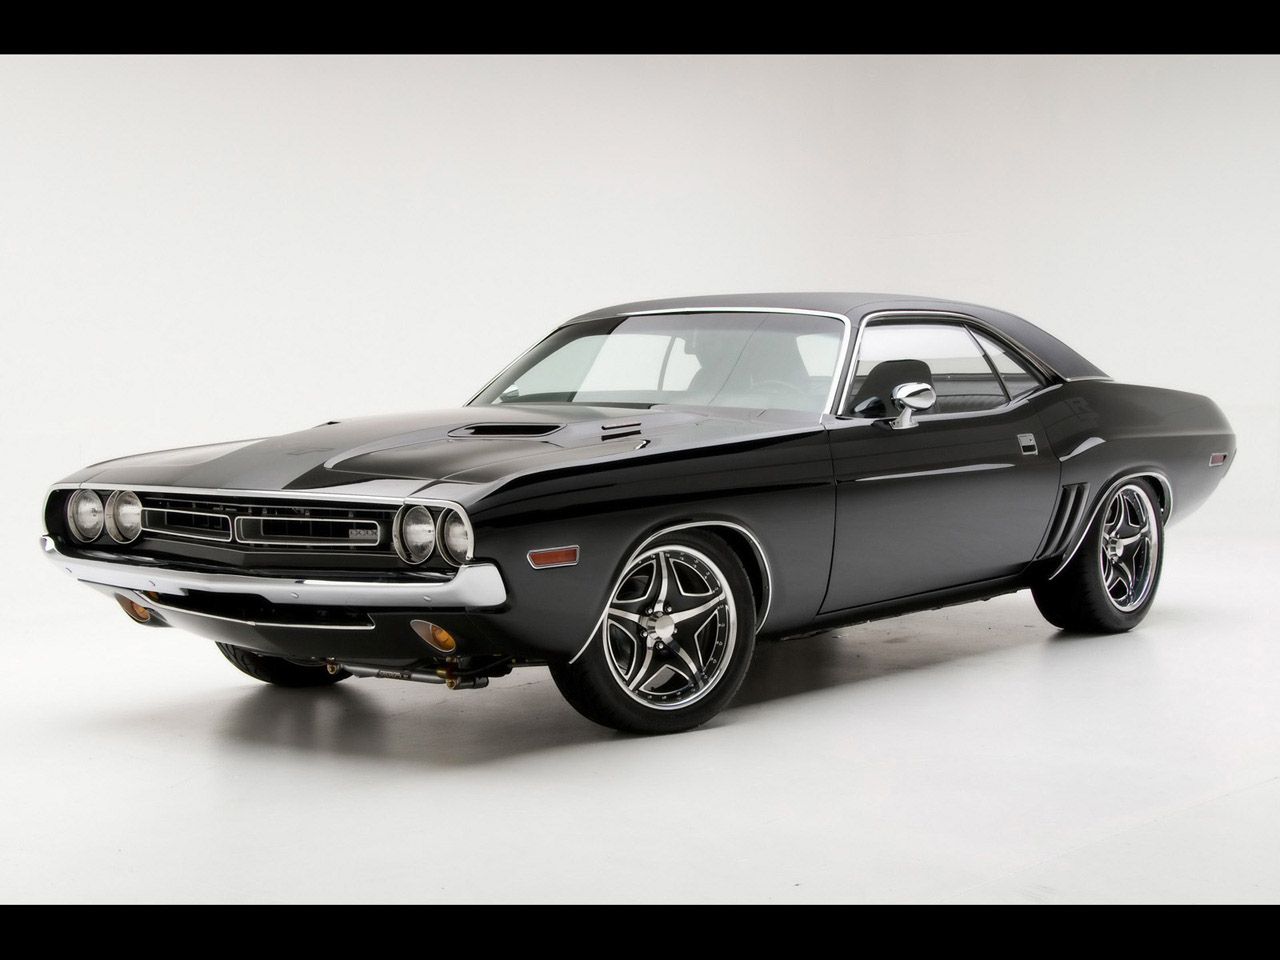 the best new car 2012: Muscle car wallpaper